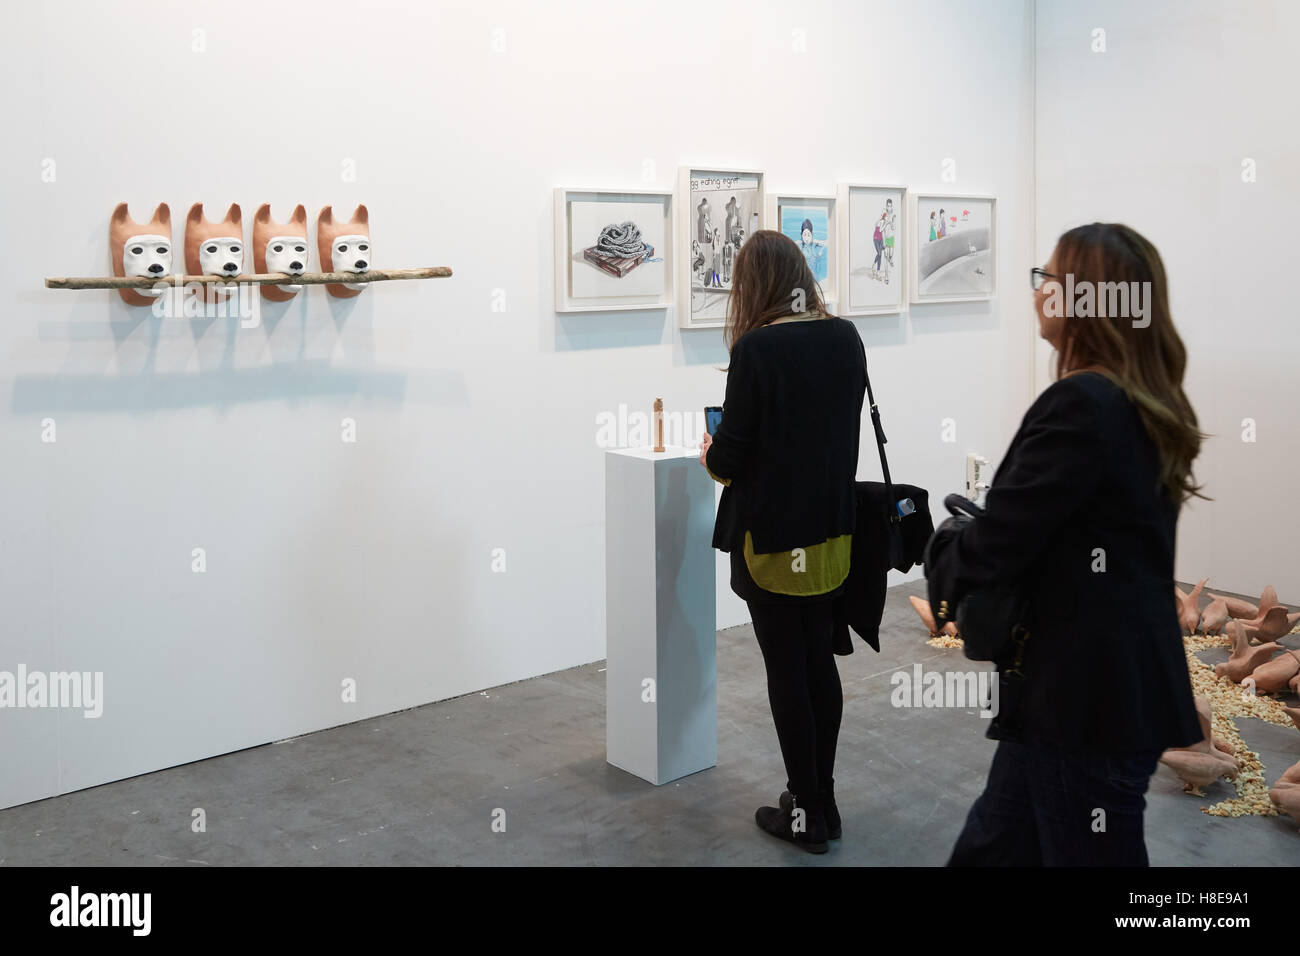 Visitors looking at artworks during Artissima, contemporary art fair opening Stock Photo